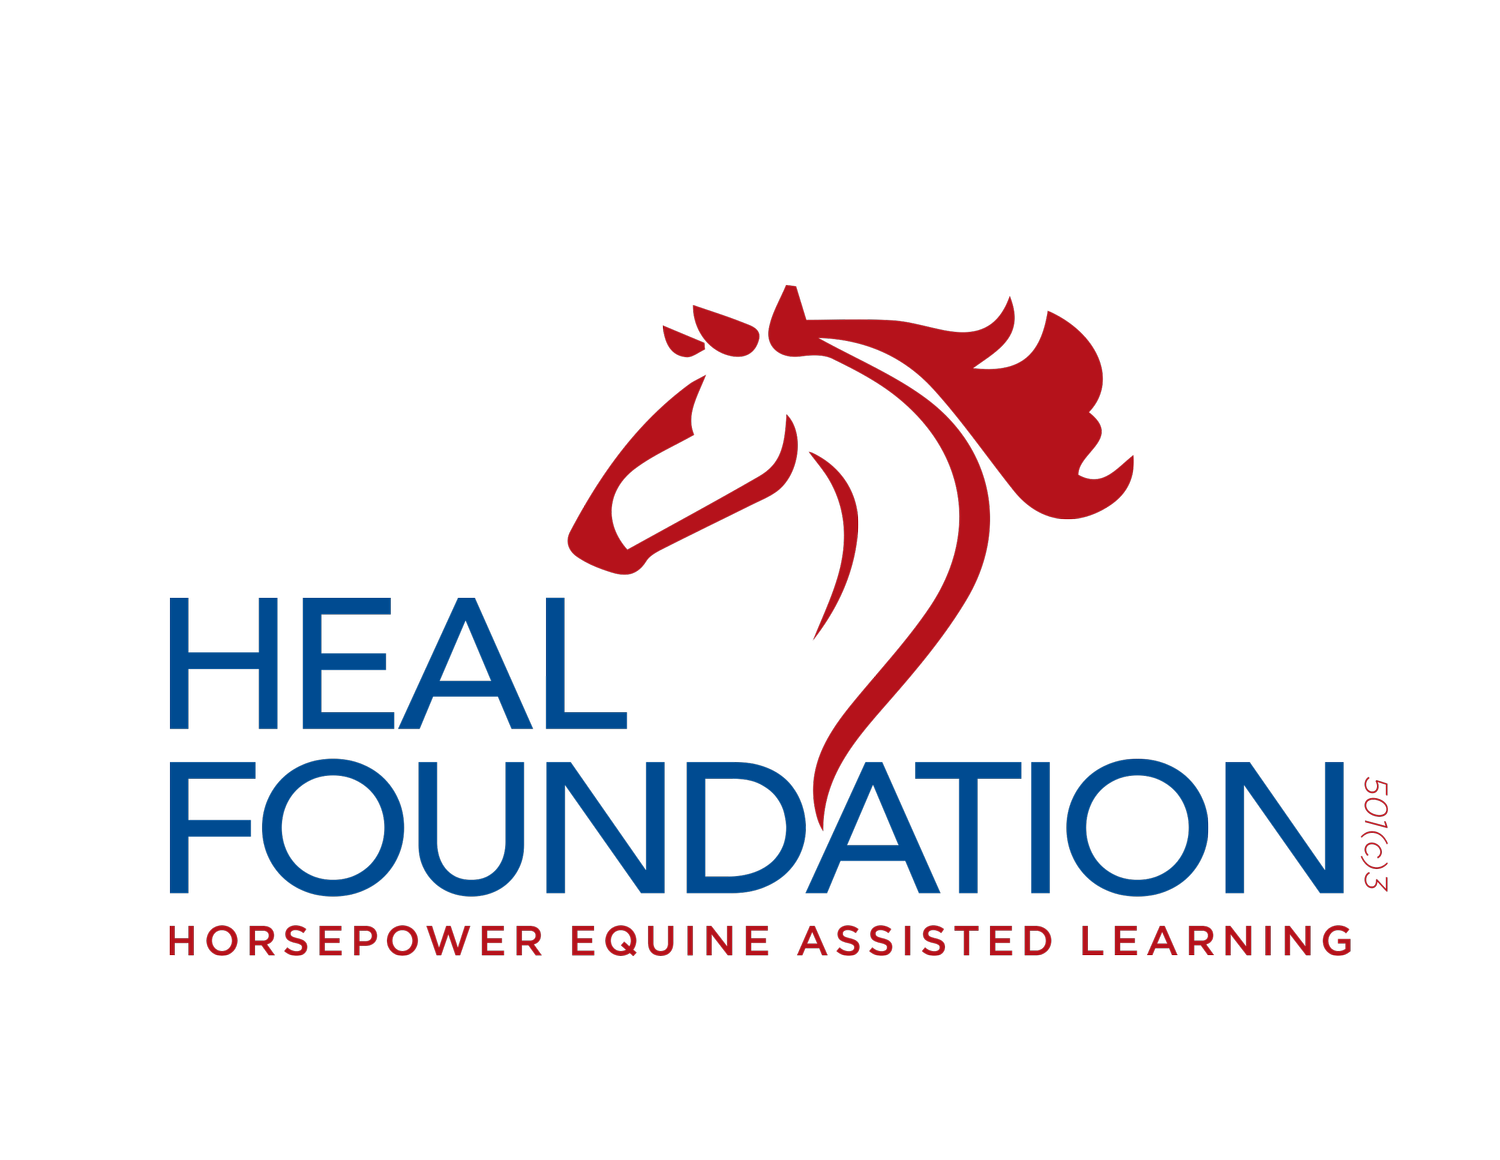 The HEAL Foundation 